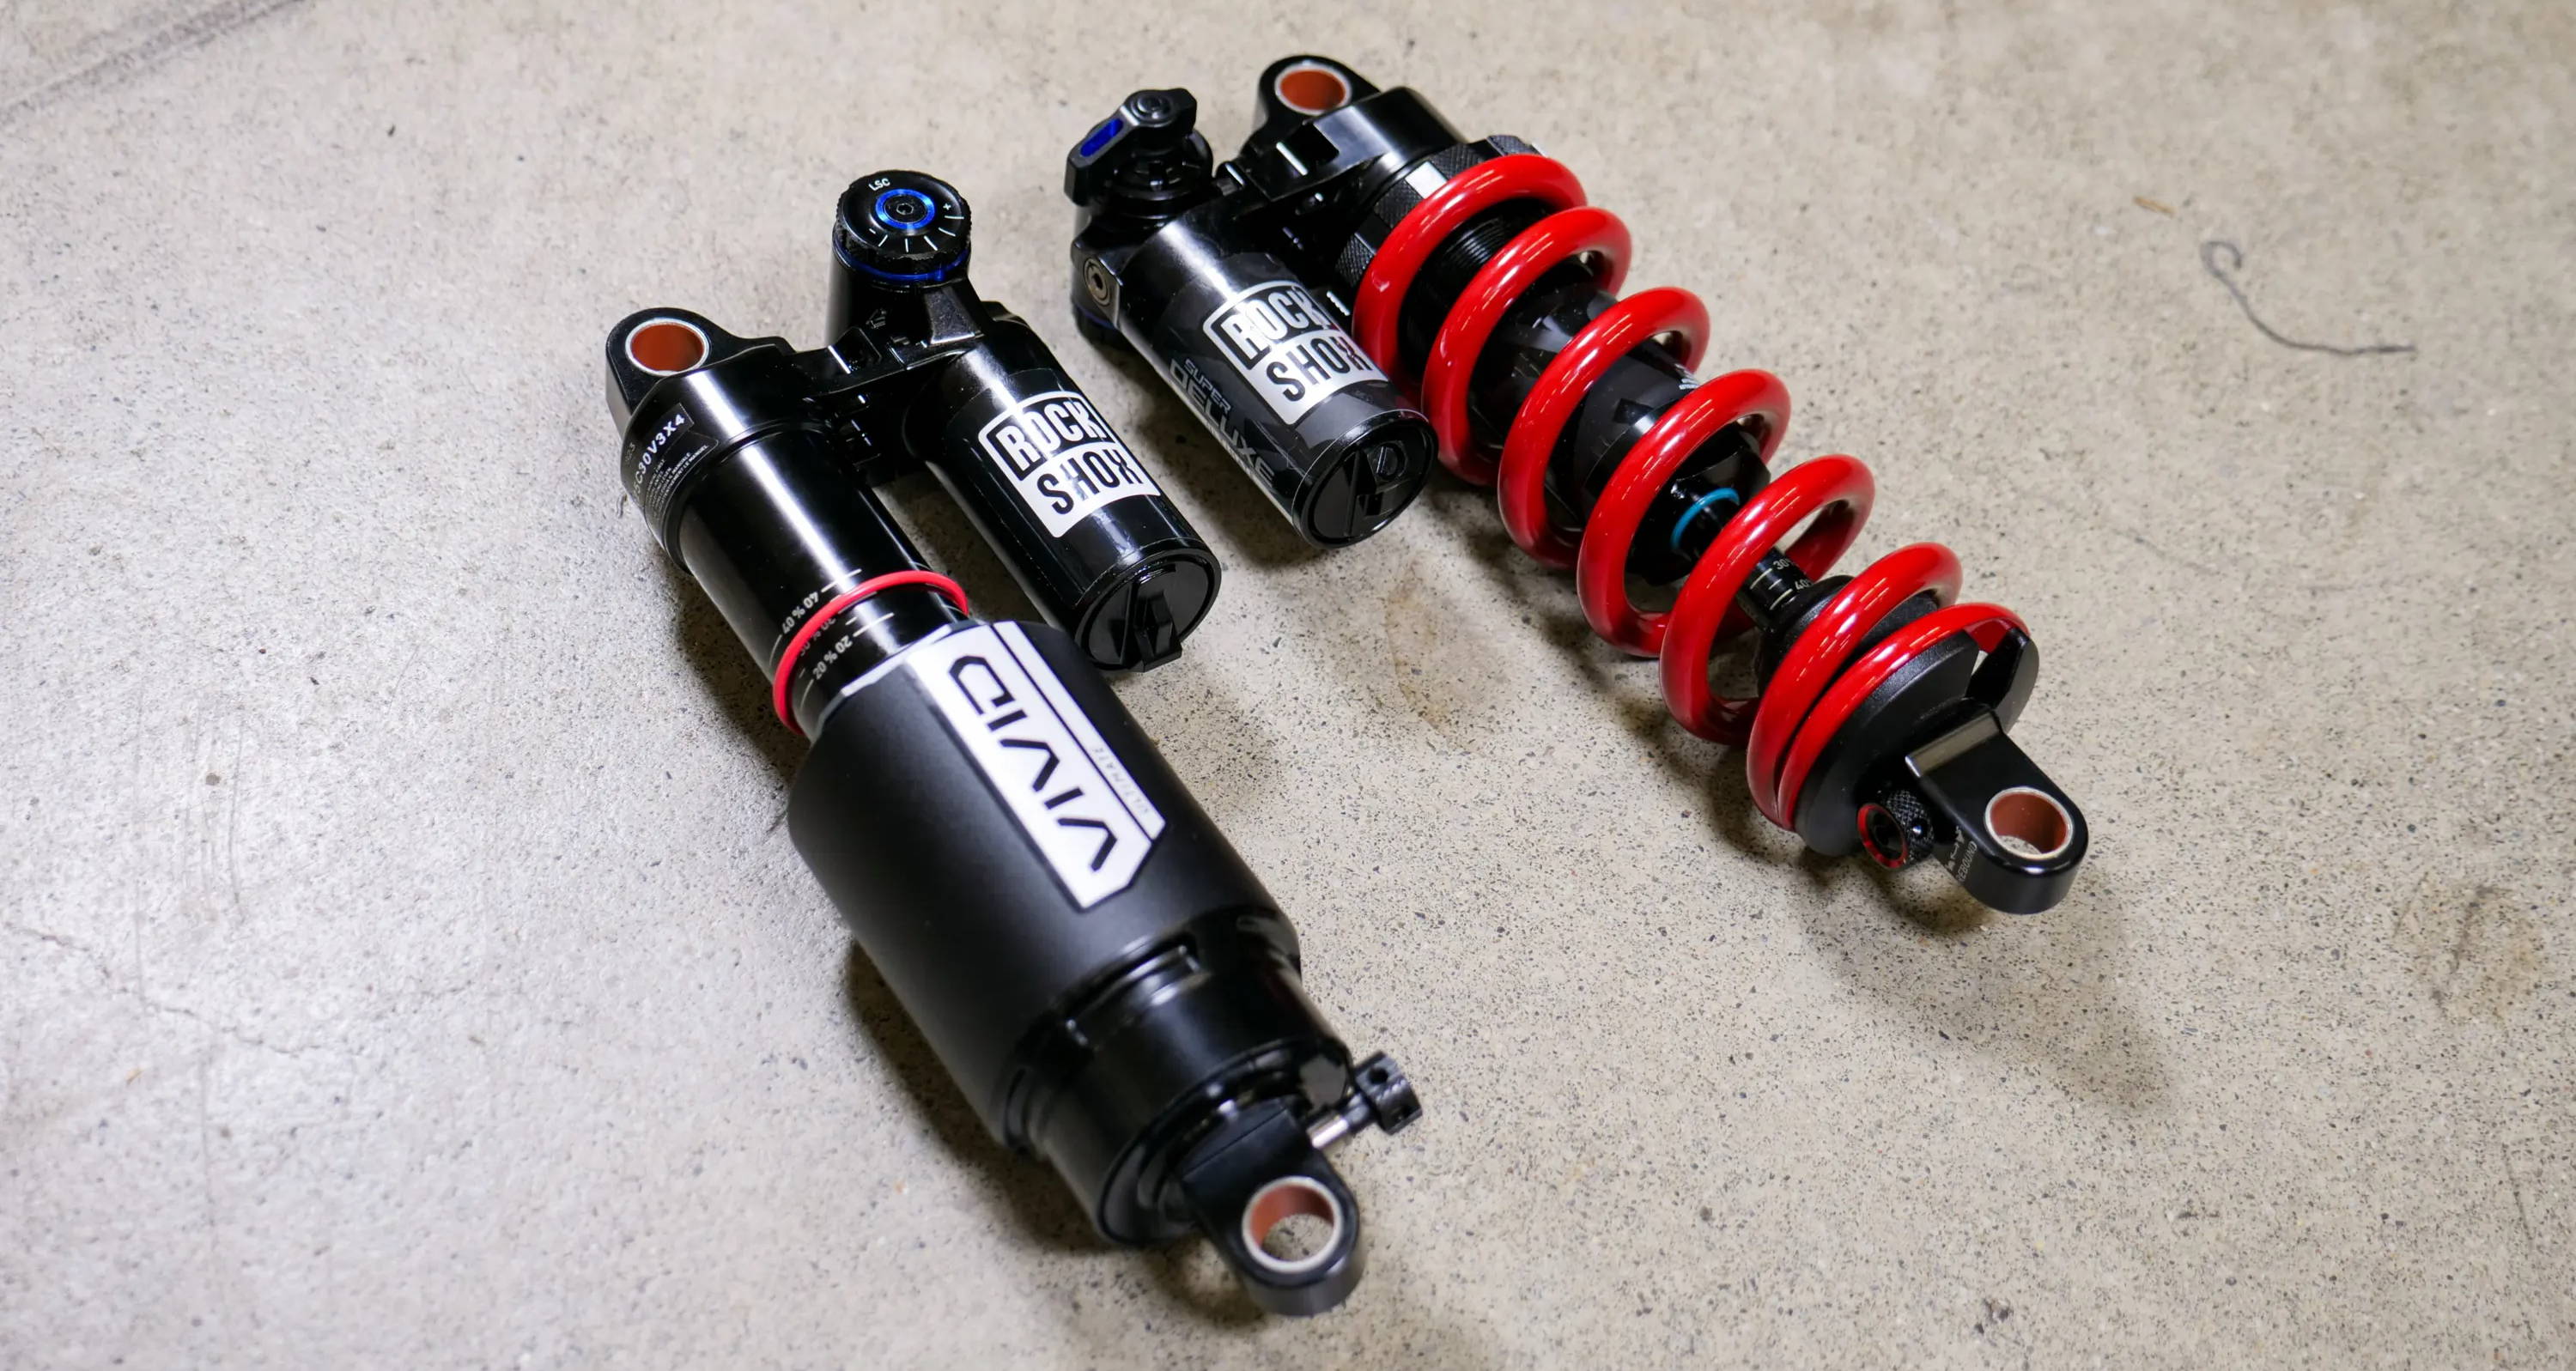 rockshox super deluxe coil ultimate and vivid rear mountain bike shocks laying on concrete to be compared